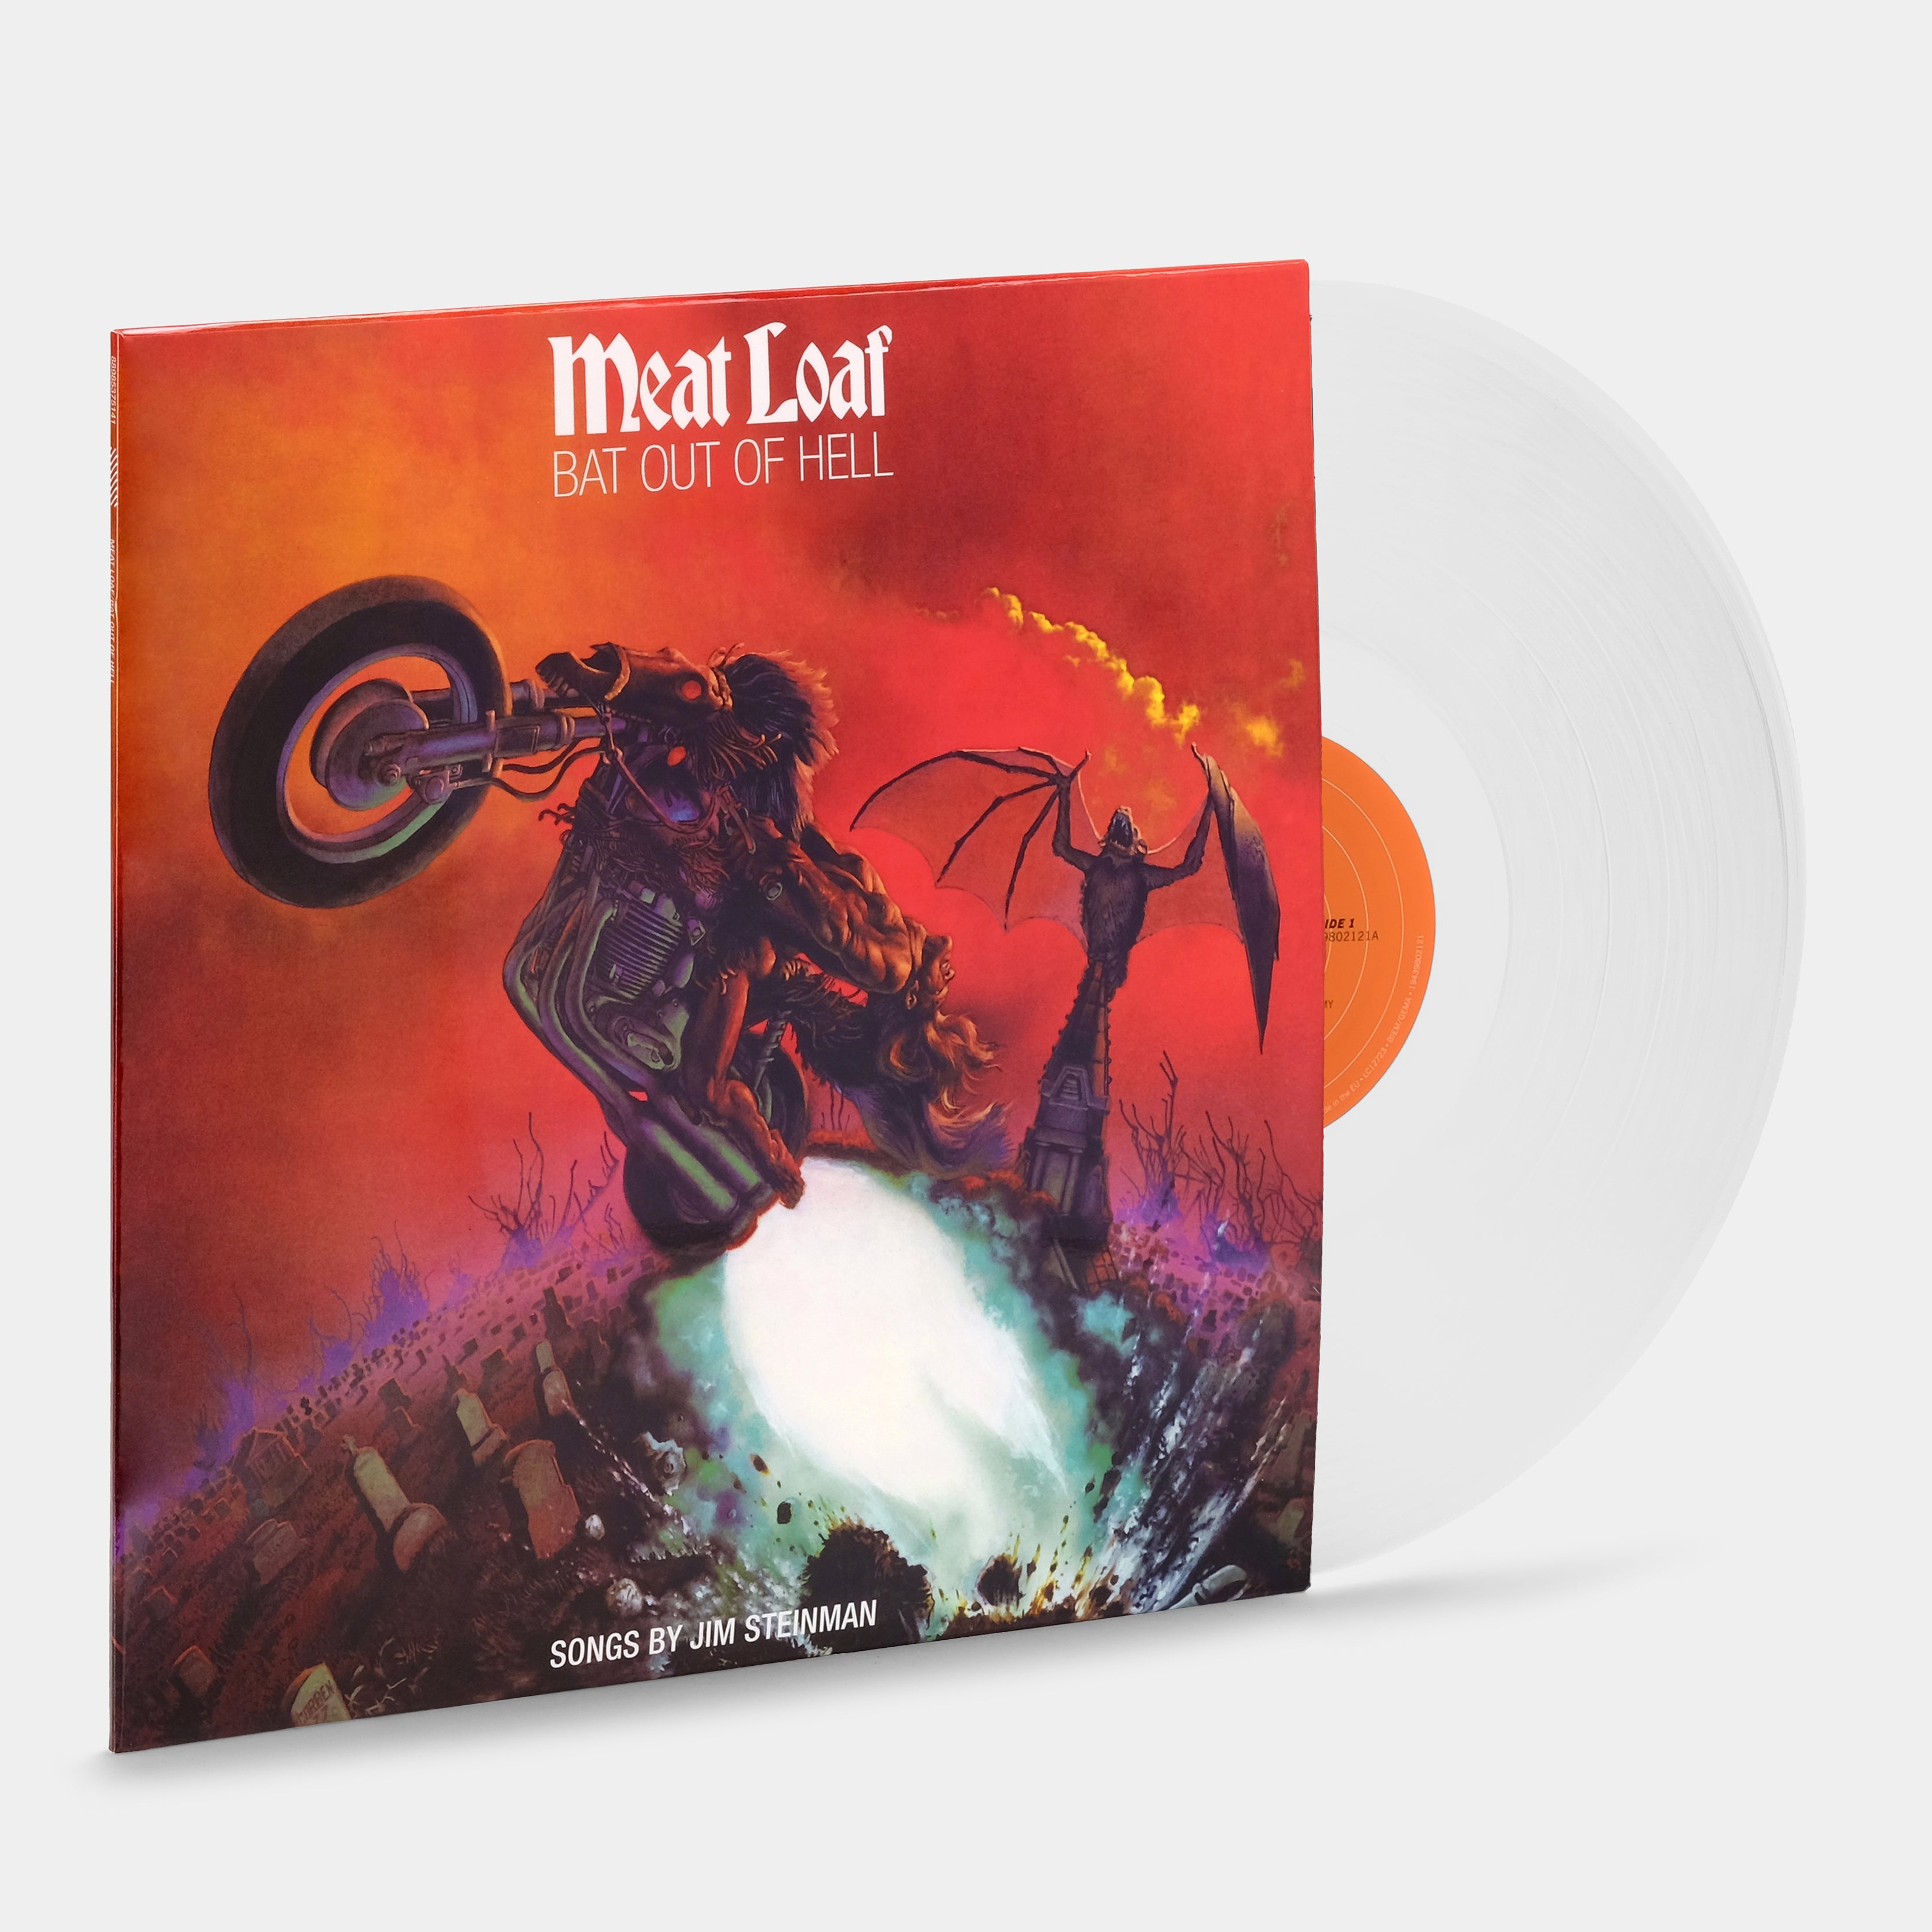 Meat Loaf - Bat Out Of Hell LP Clear Vinyl Record